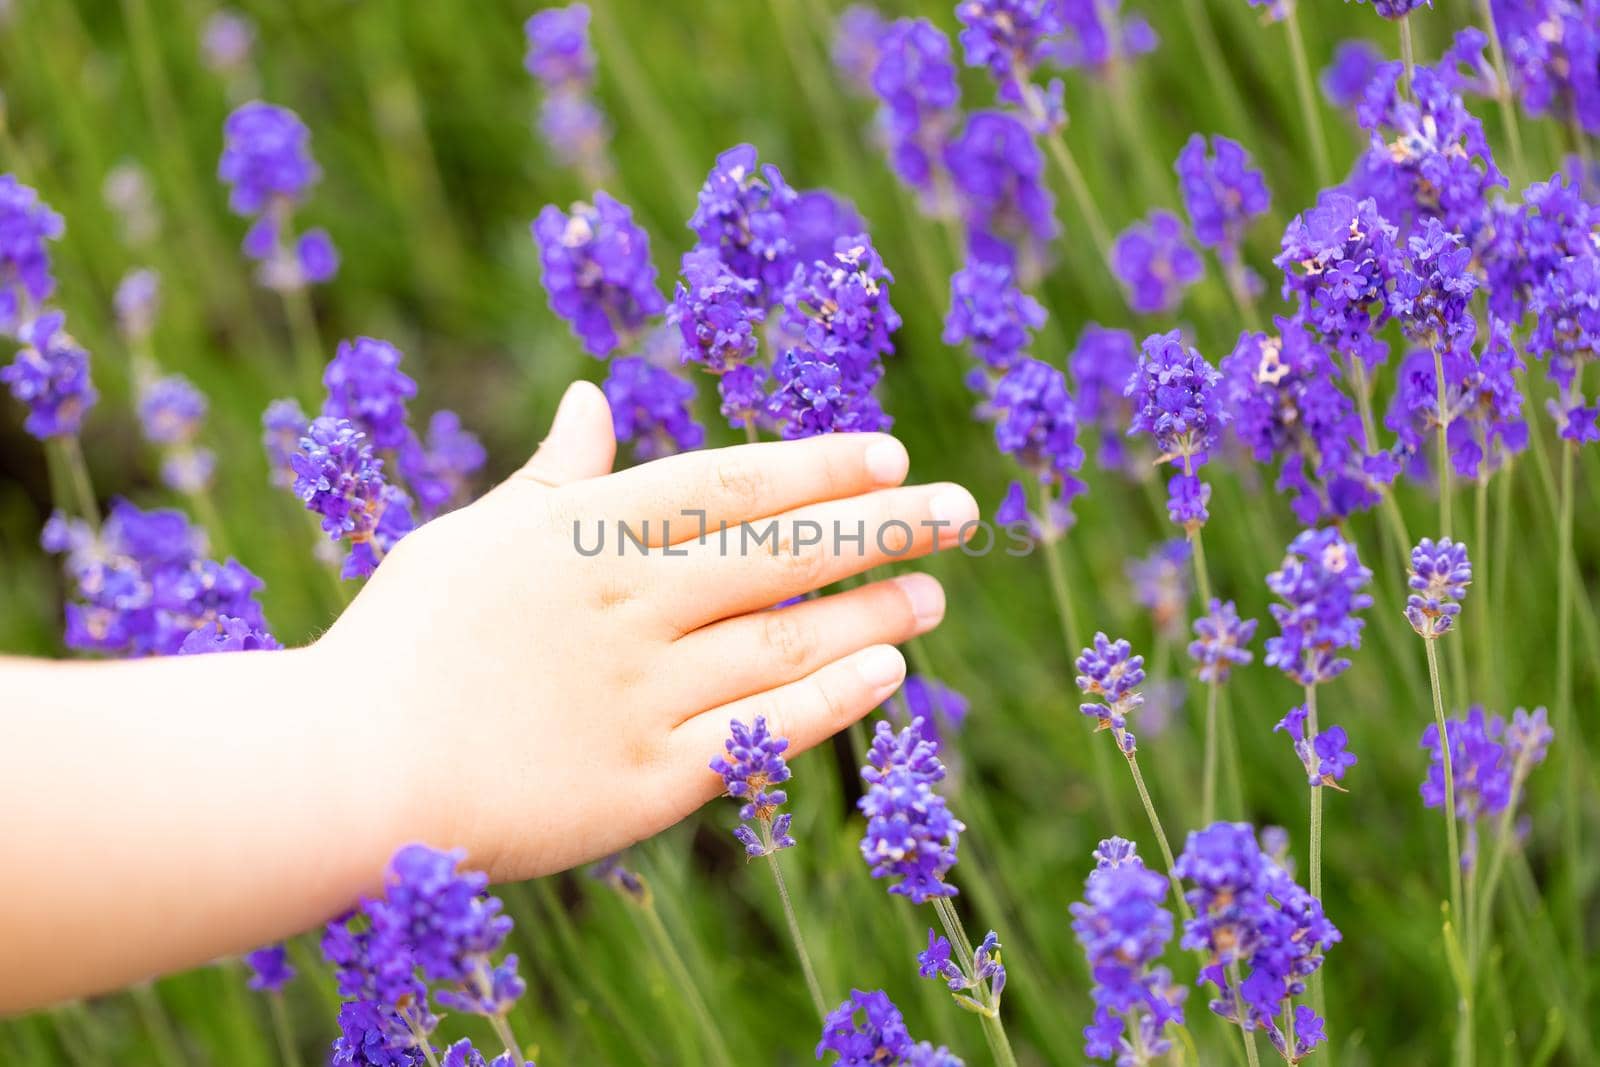 Lavender bushes closeup. Purple lavender field, beautiful blooming, English lavander, Provance. Child's hand touches lavender flowers on a lavender field summer sunny morning.